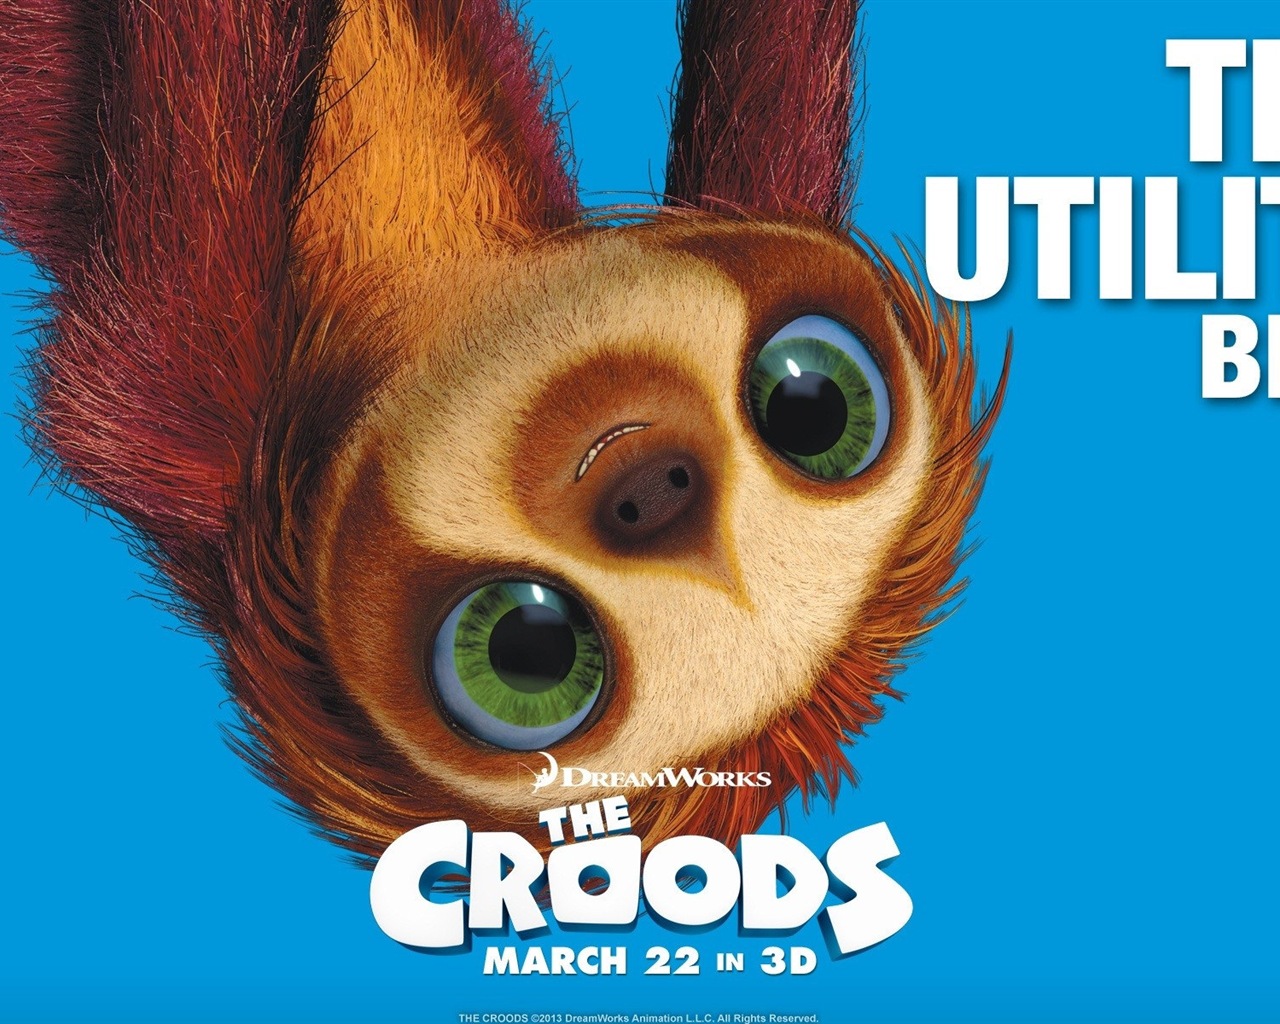 The Croods HD movie wallpapers #14 - 1280x1024